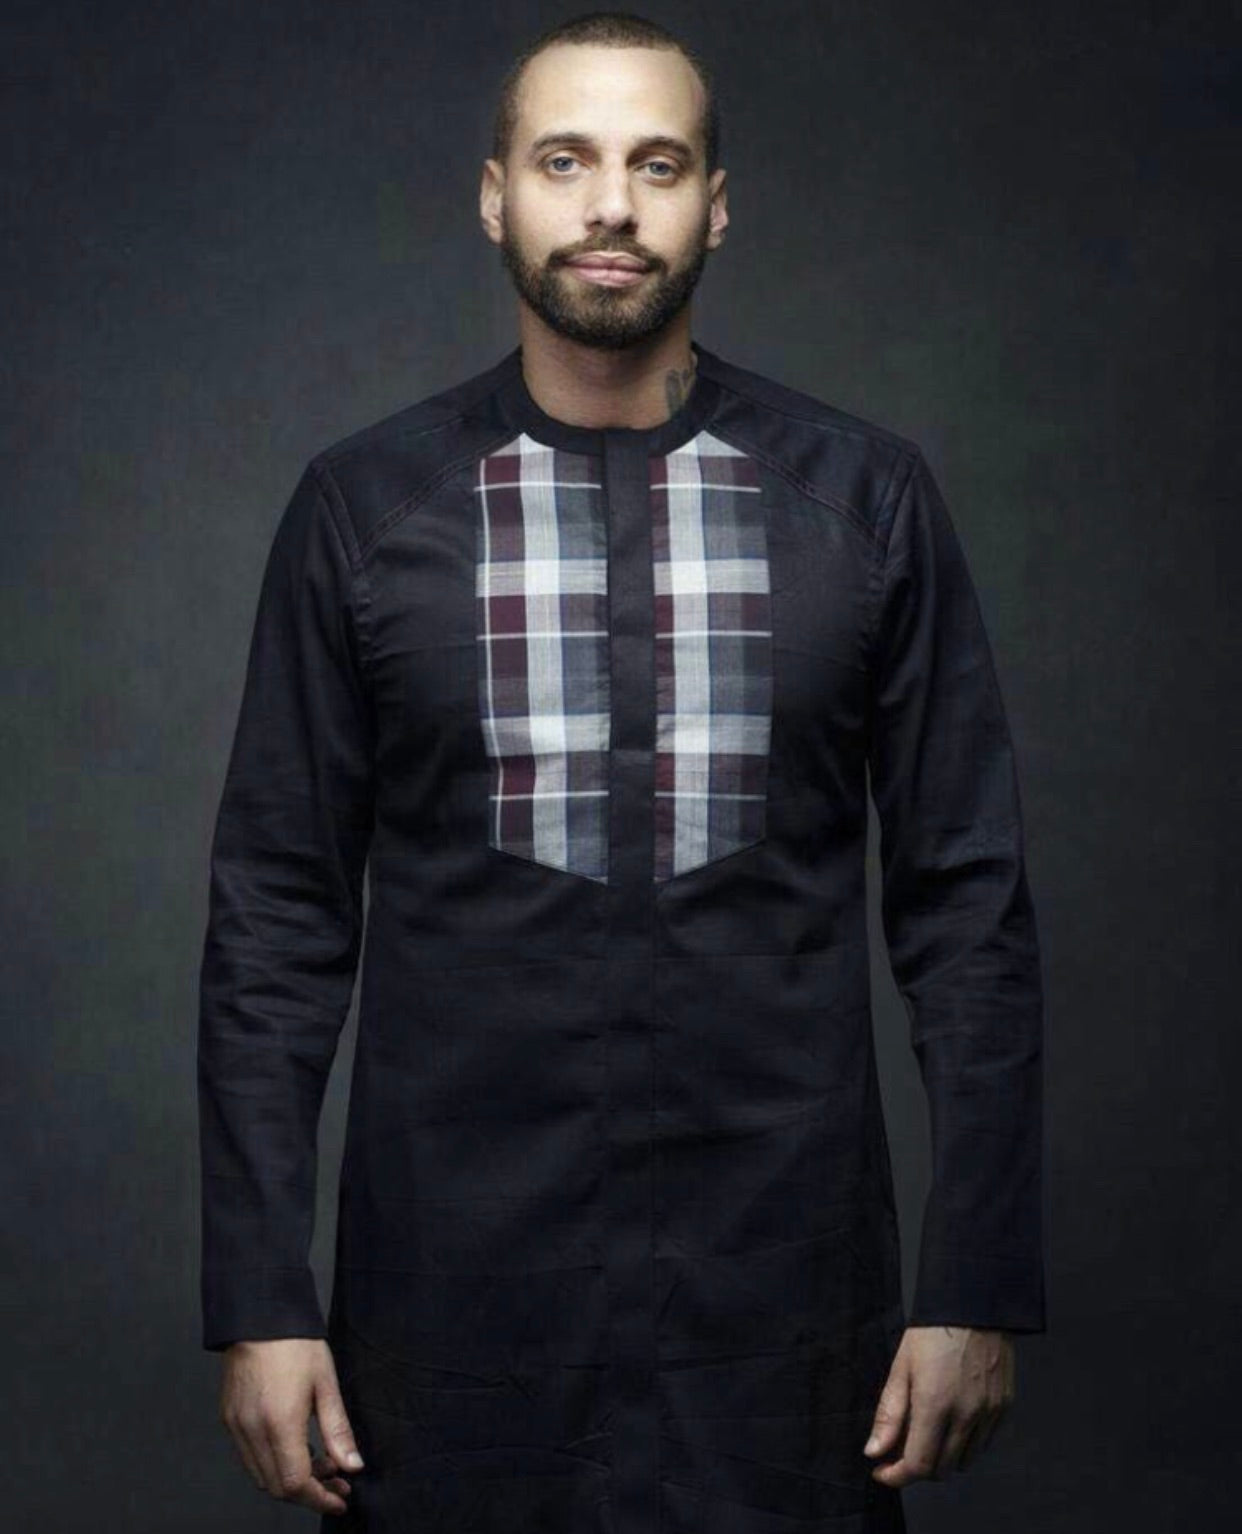 Men’s Ankara Plaid Pride Top (Currently available in Navy Blue)